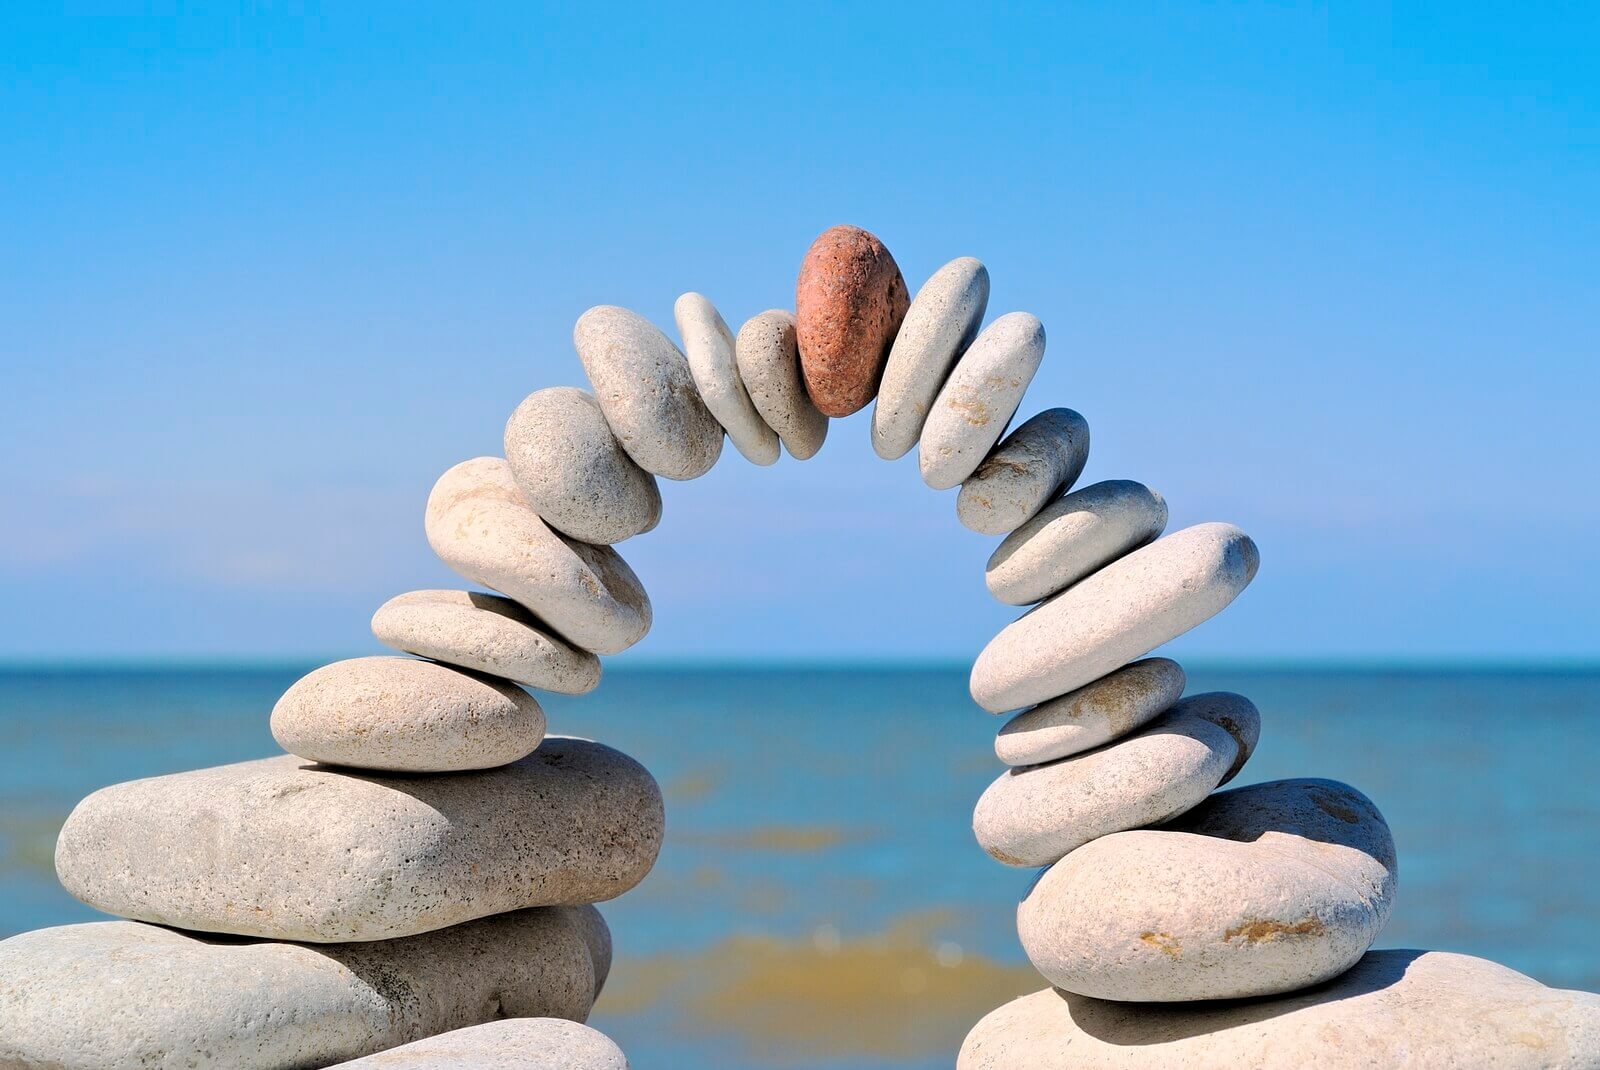 stones balanced together reflecting how revenue optimization is only achieved by working together and breaking down silos